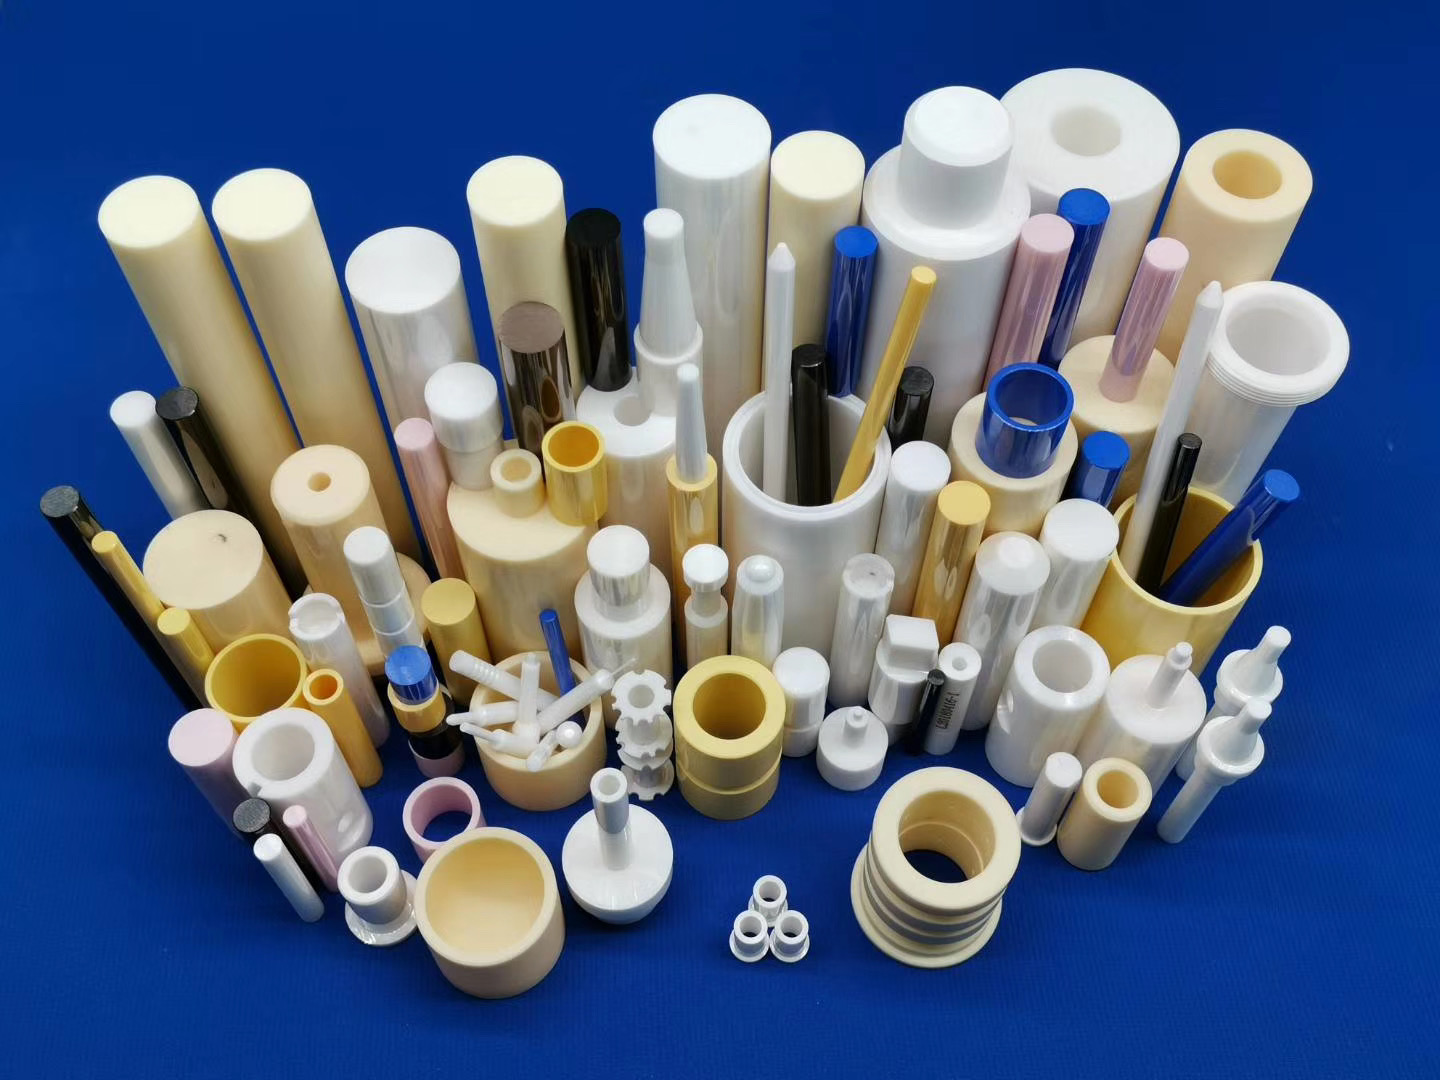 Hyflux ceramics are of high quality and reasonable price